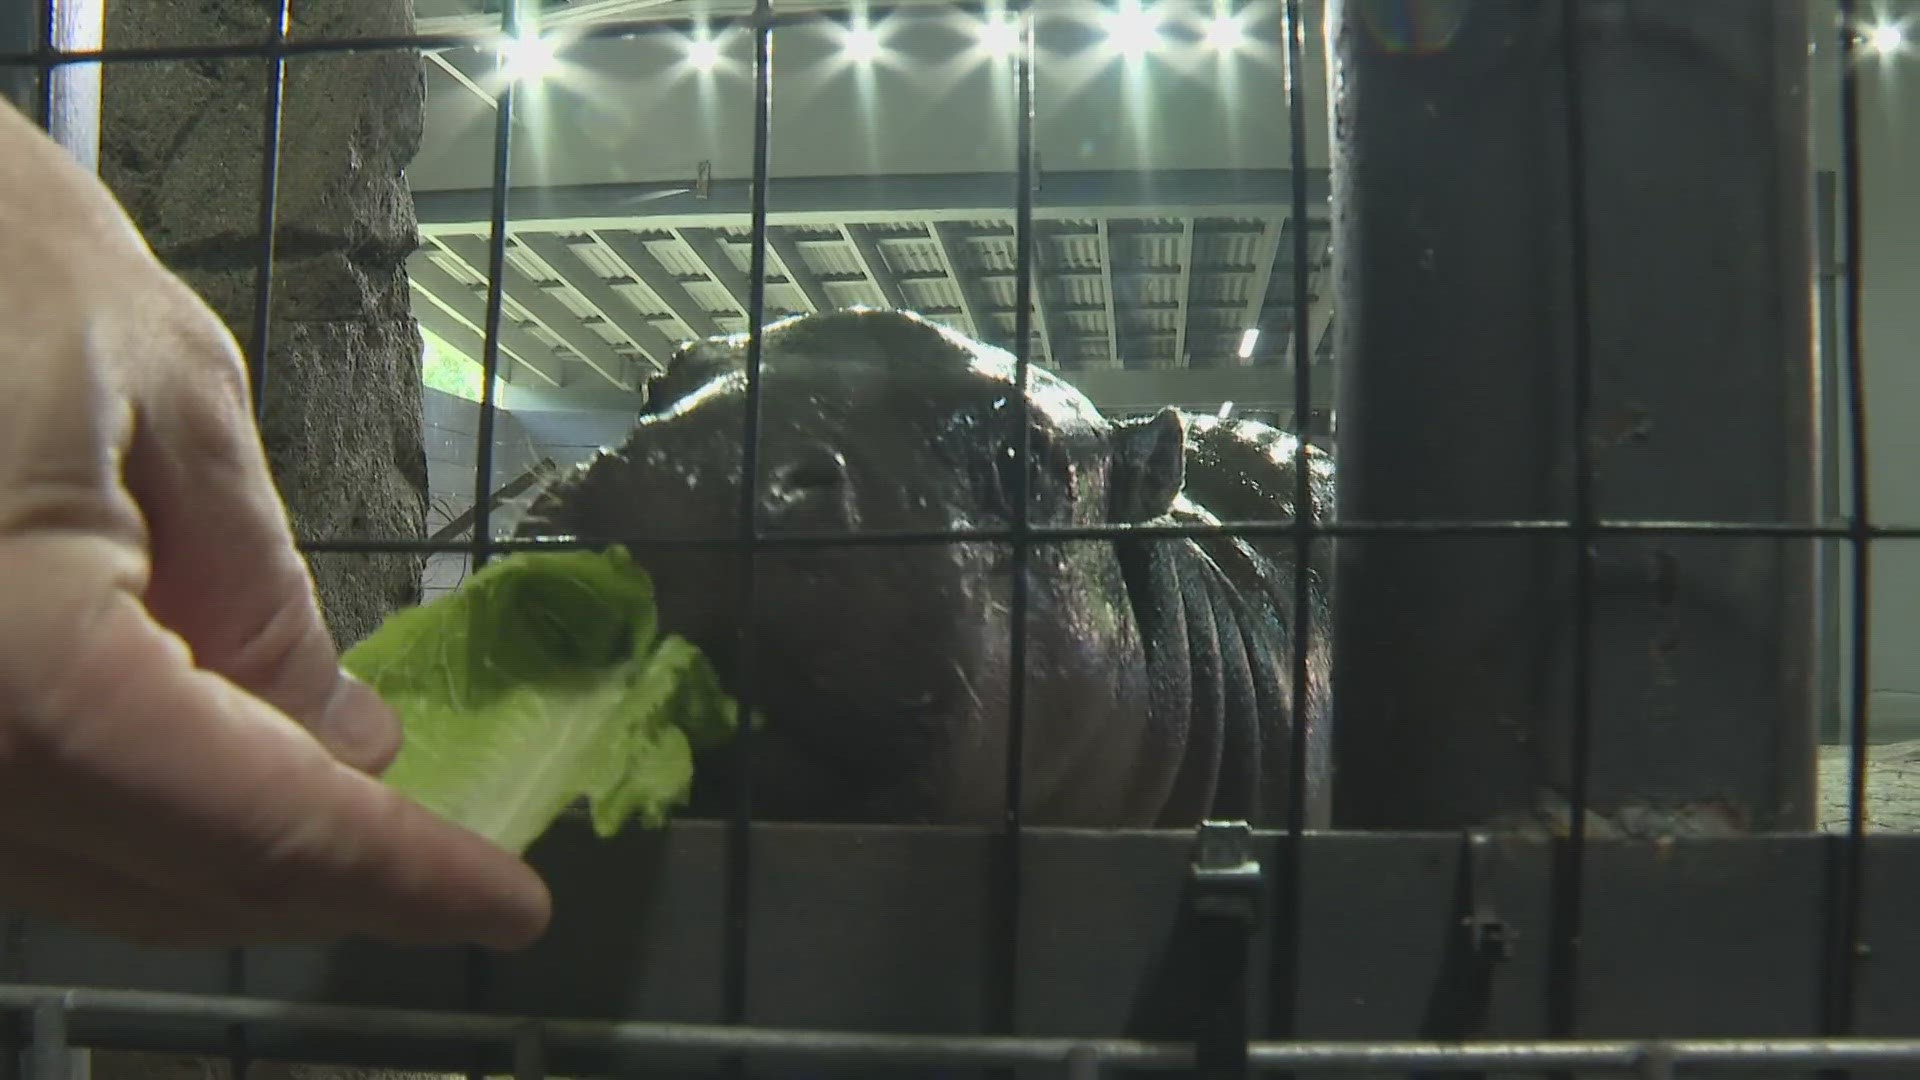 WFMY News 2's Eric Chilton gets up close and personal with the Pygmy Hippos at the Greensboro Science Center.